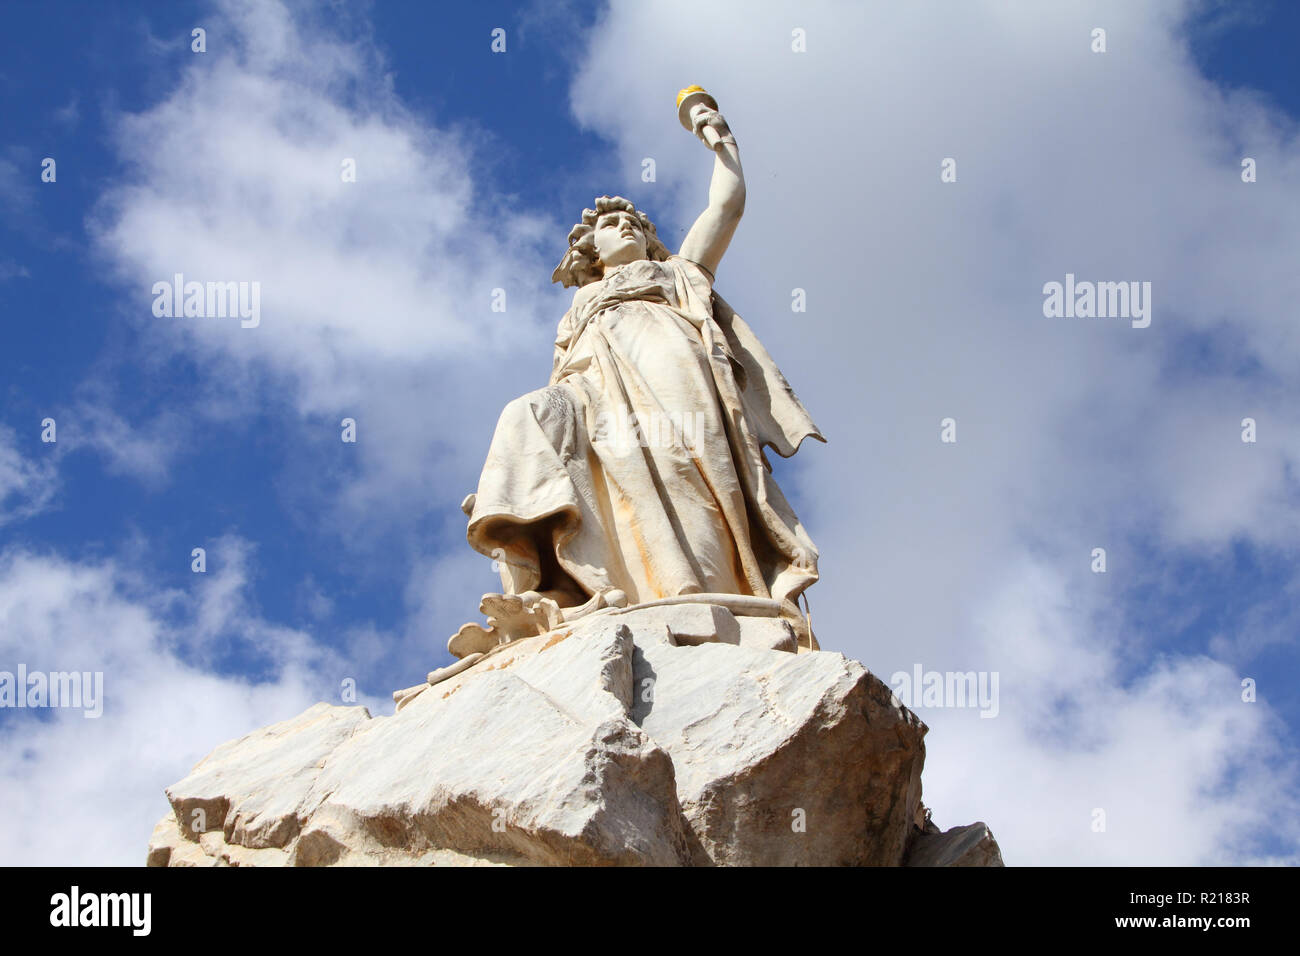 Statue of liberty in Remedios, Cuba. Freedom and justice allegory. Stock Photo